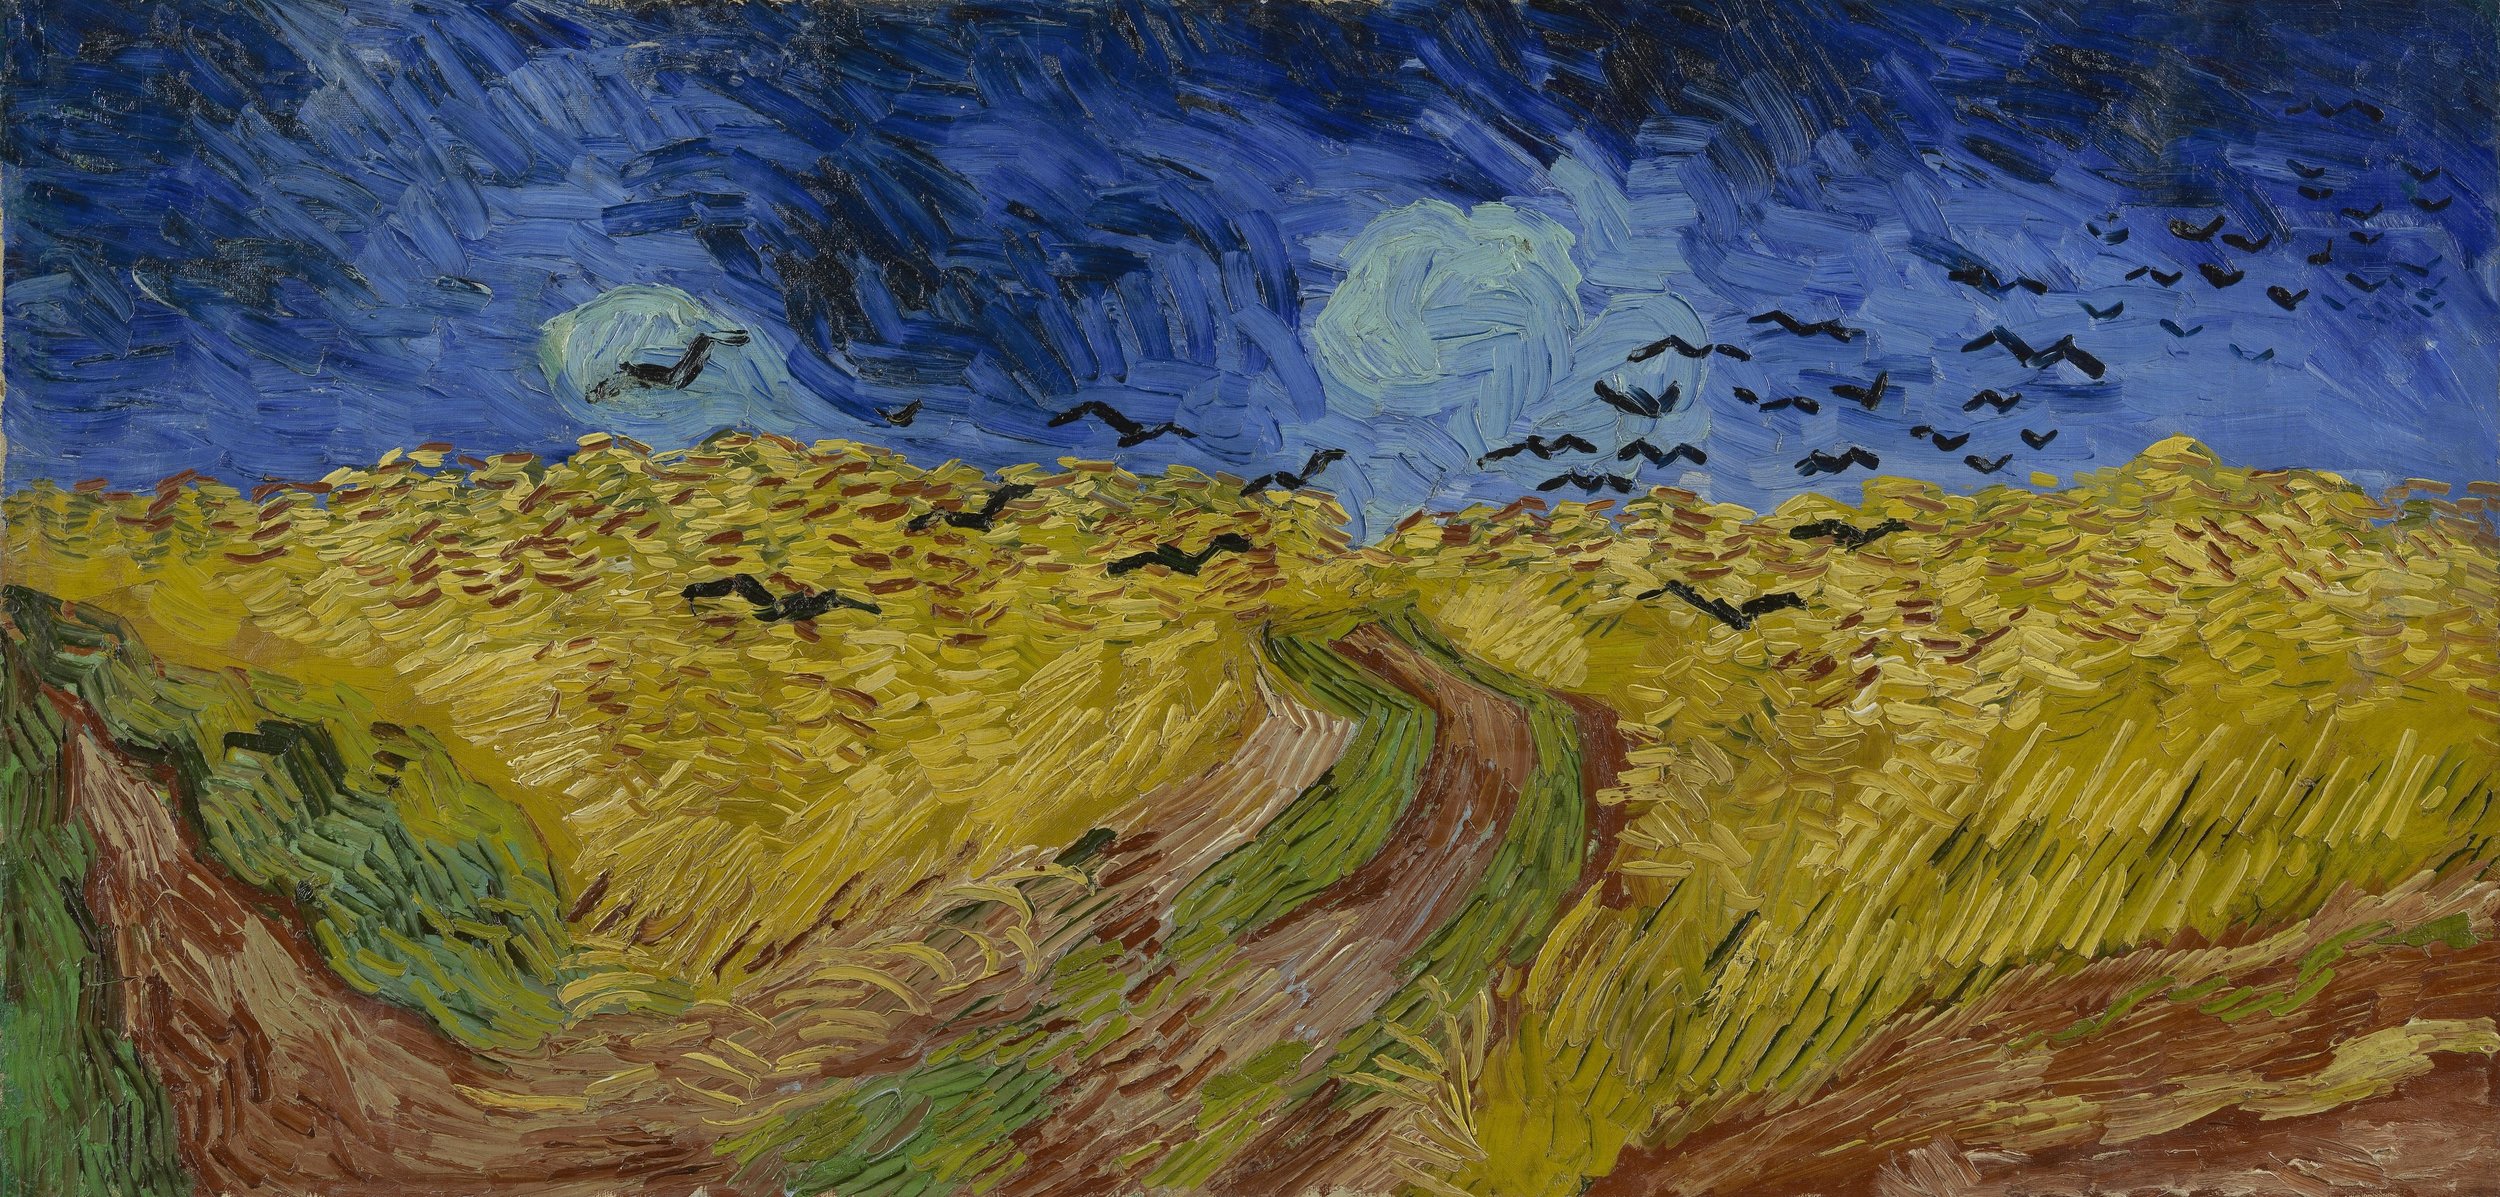 Vincent Van Gogh, Wheatfield with Crows